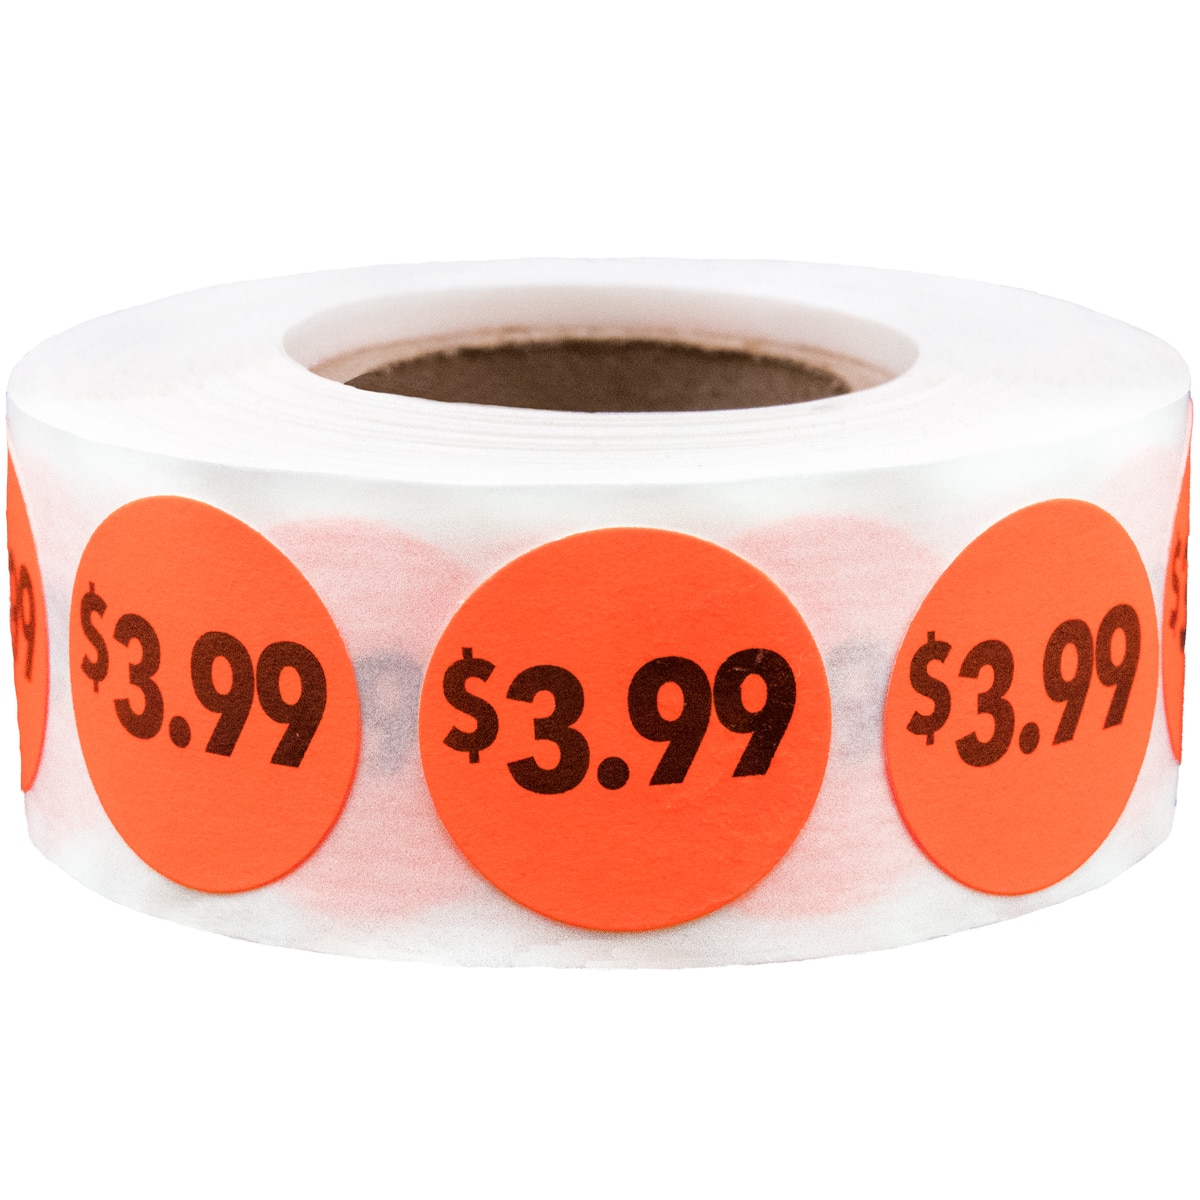 Preprinted price tags stickers, Pricing labels for retail 3/4 inch 19mm  amount $3.00, Bonus blank Dots, 1040 pack